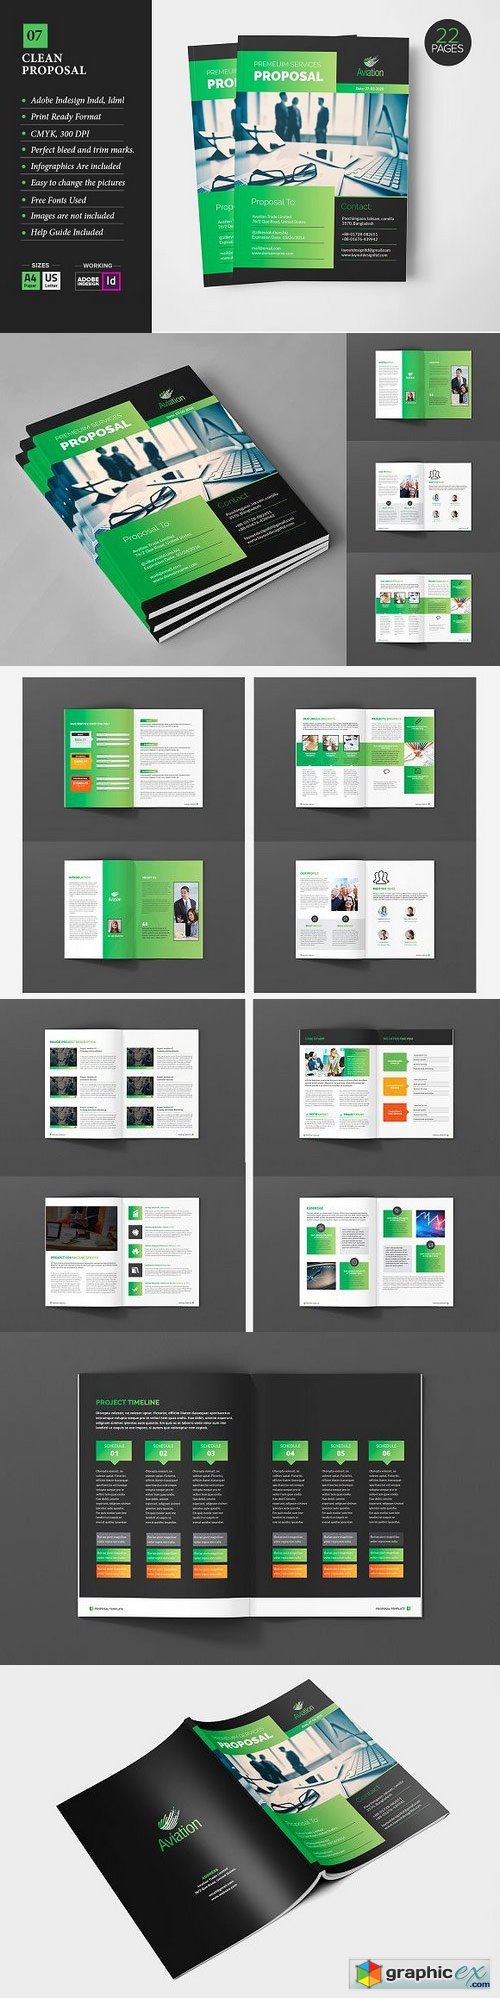 Clean Business Proposal Template 07